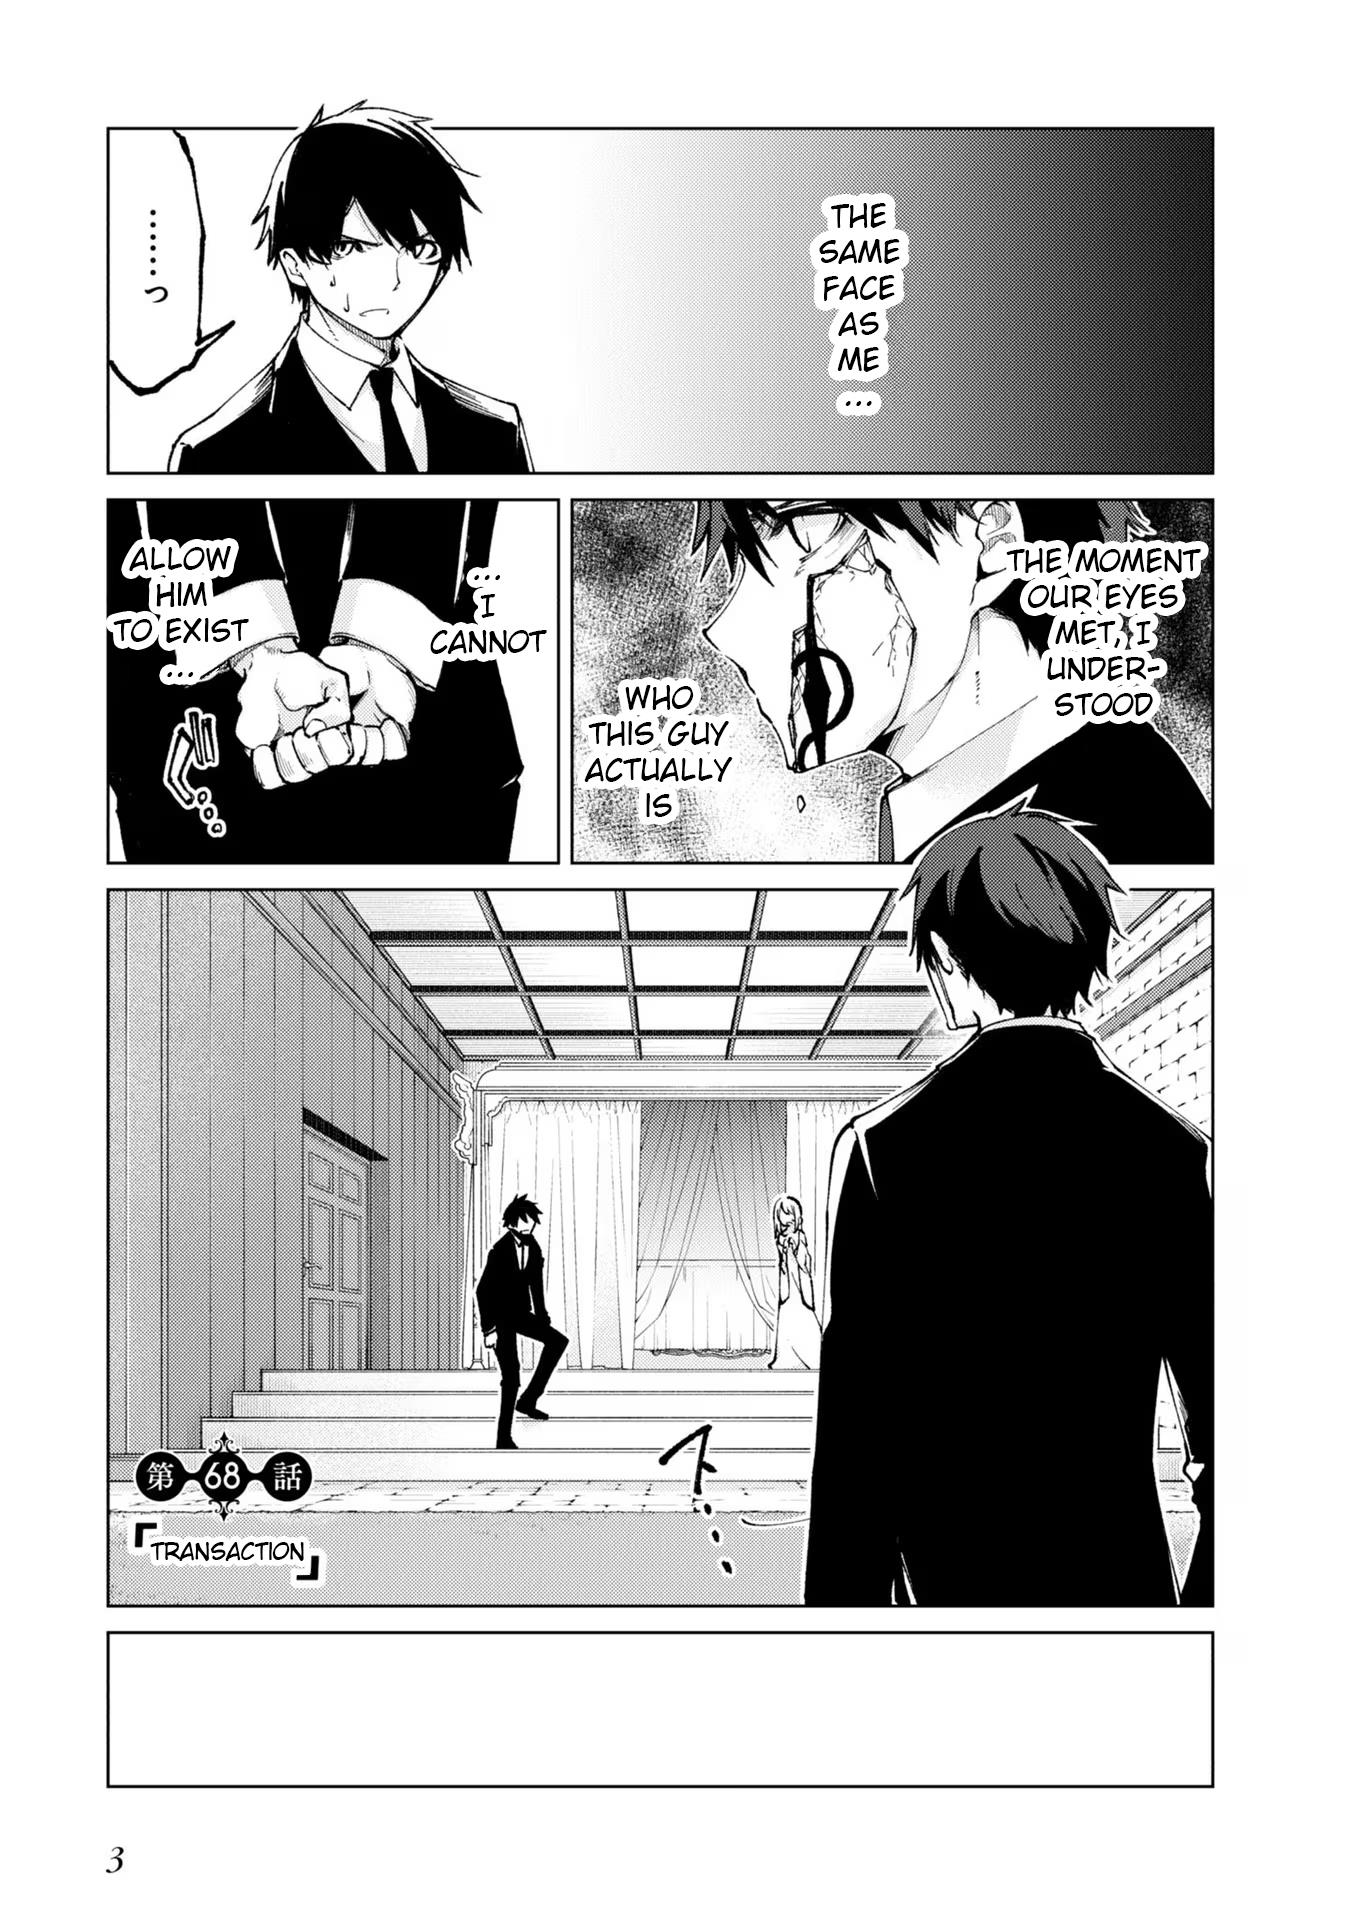 The Foolish Angel Dances With Demons Vol.15 Chapter 68: Transaction - Picture 1